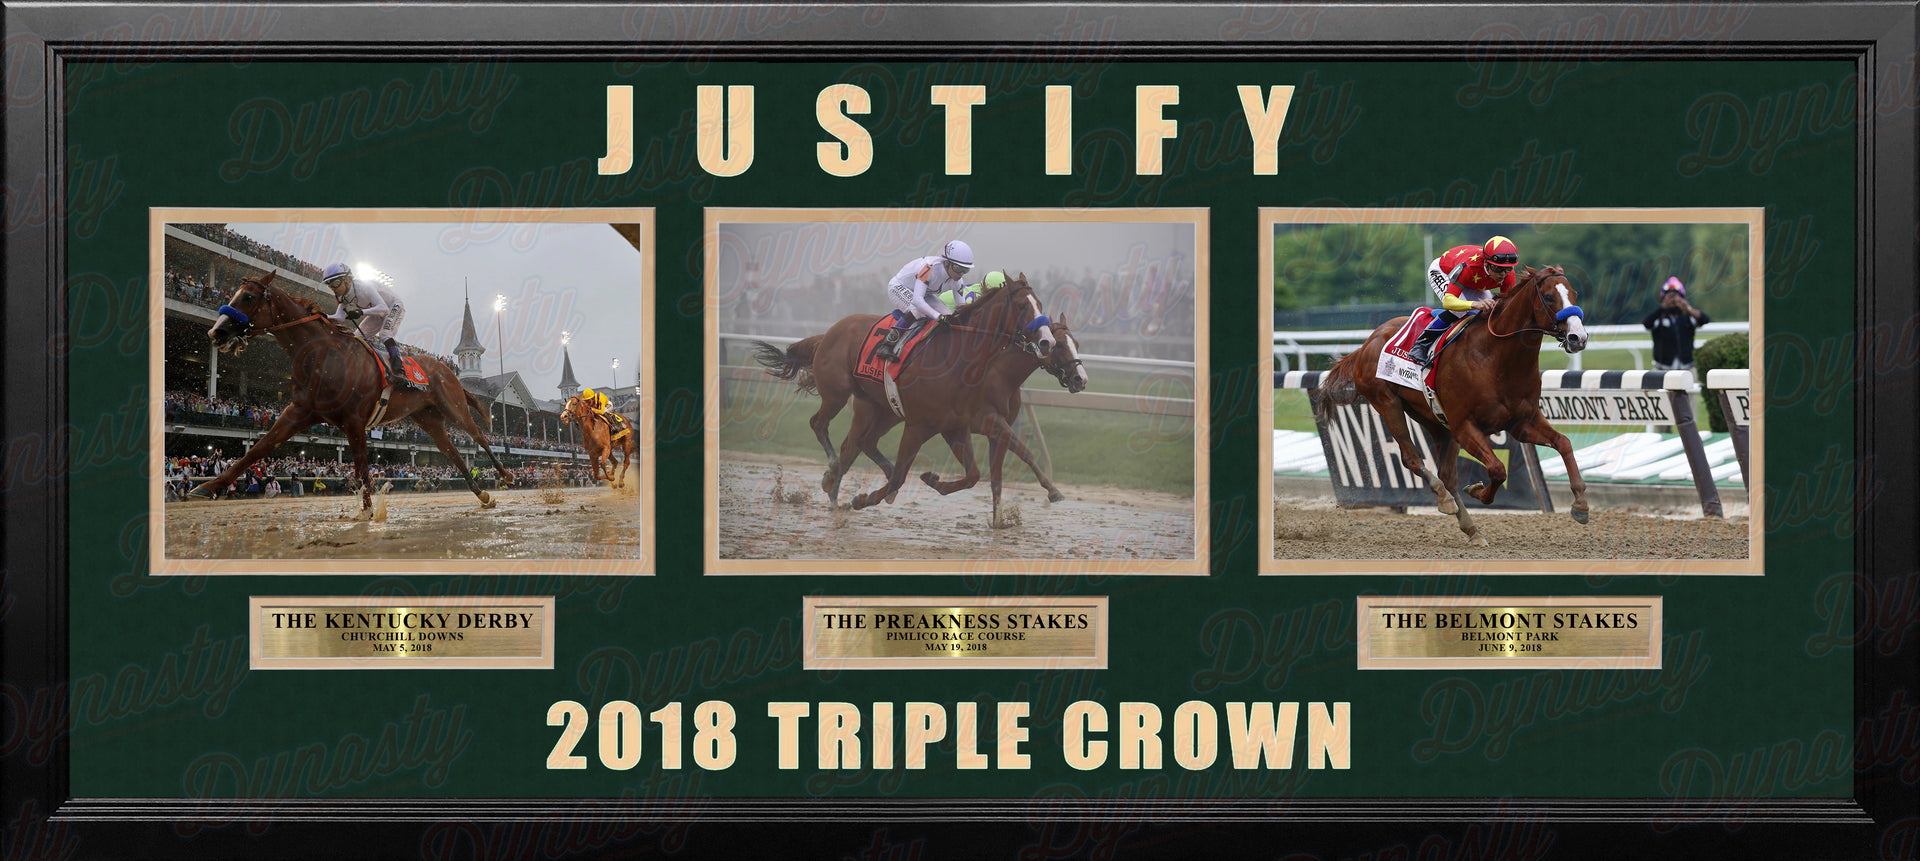 Mike Smith & Justify 2018 Triple Crown Winner Framed and Matted Horse Racing Collage - Dynasty Sports & Framing 